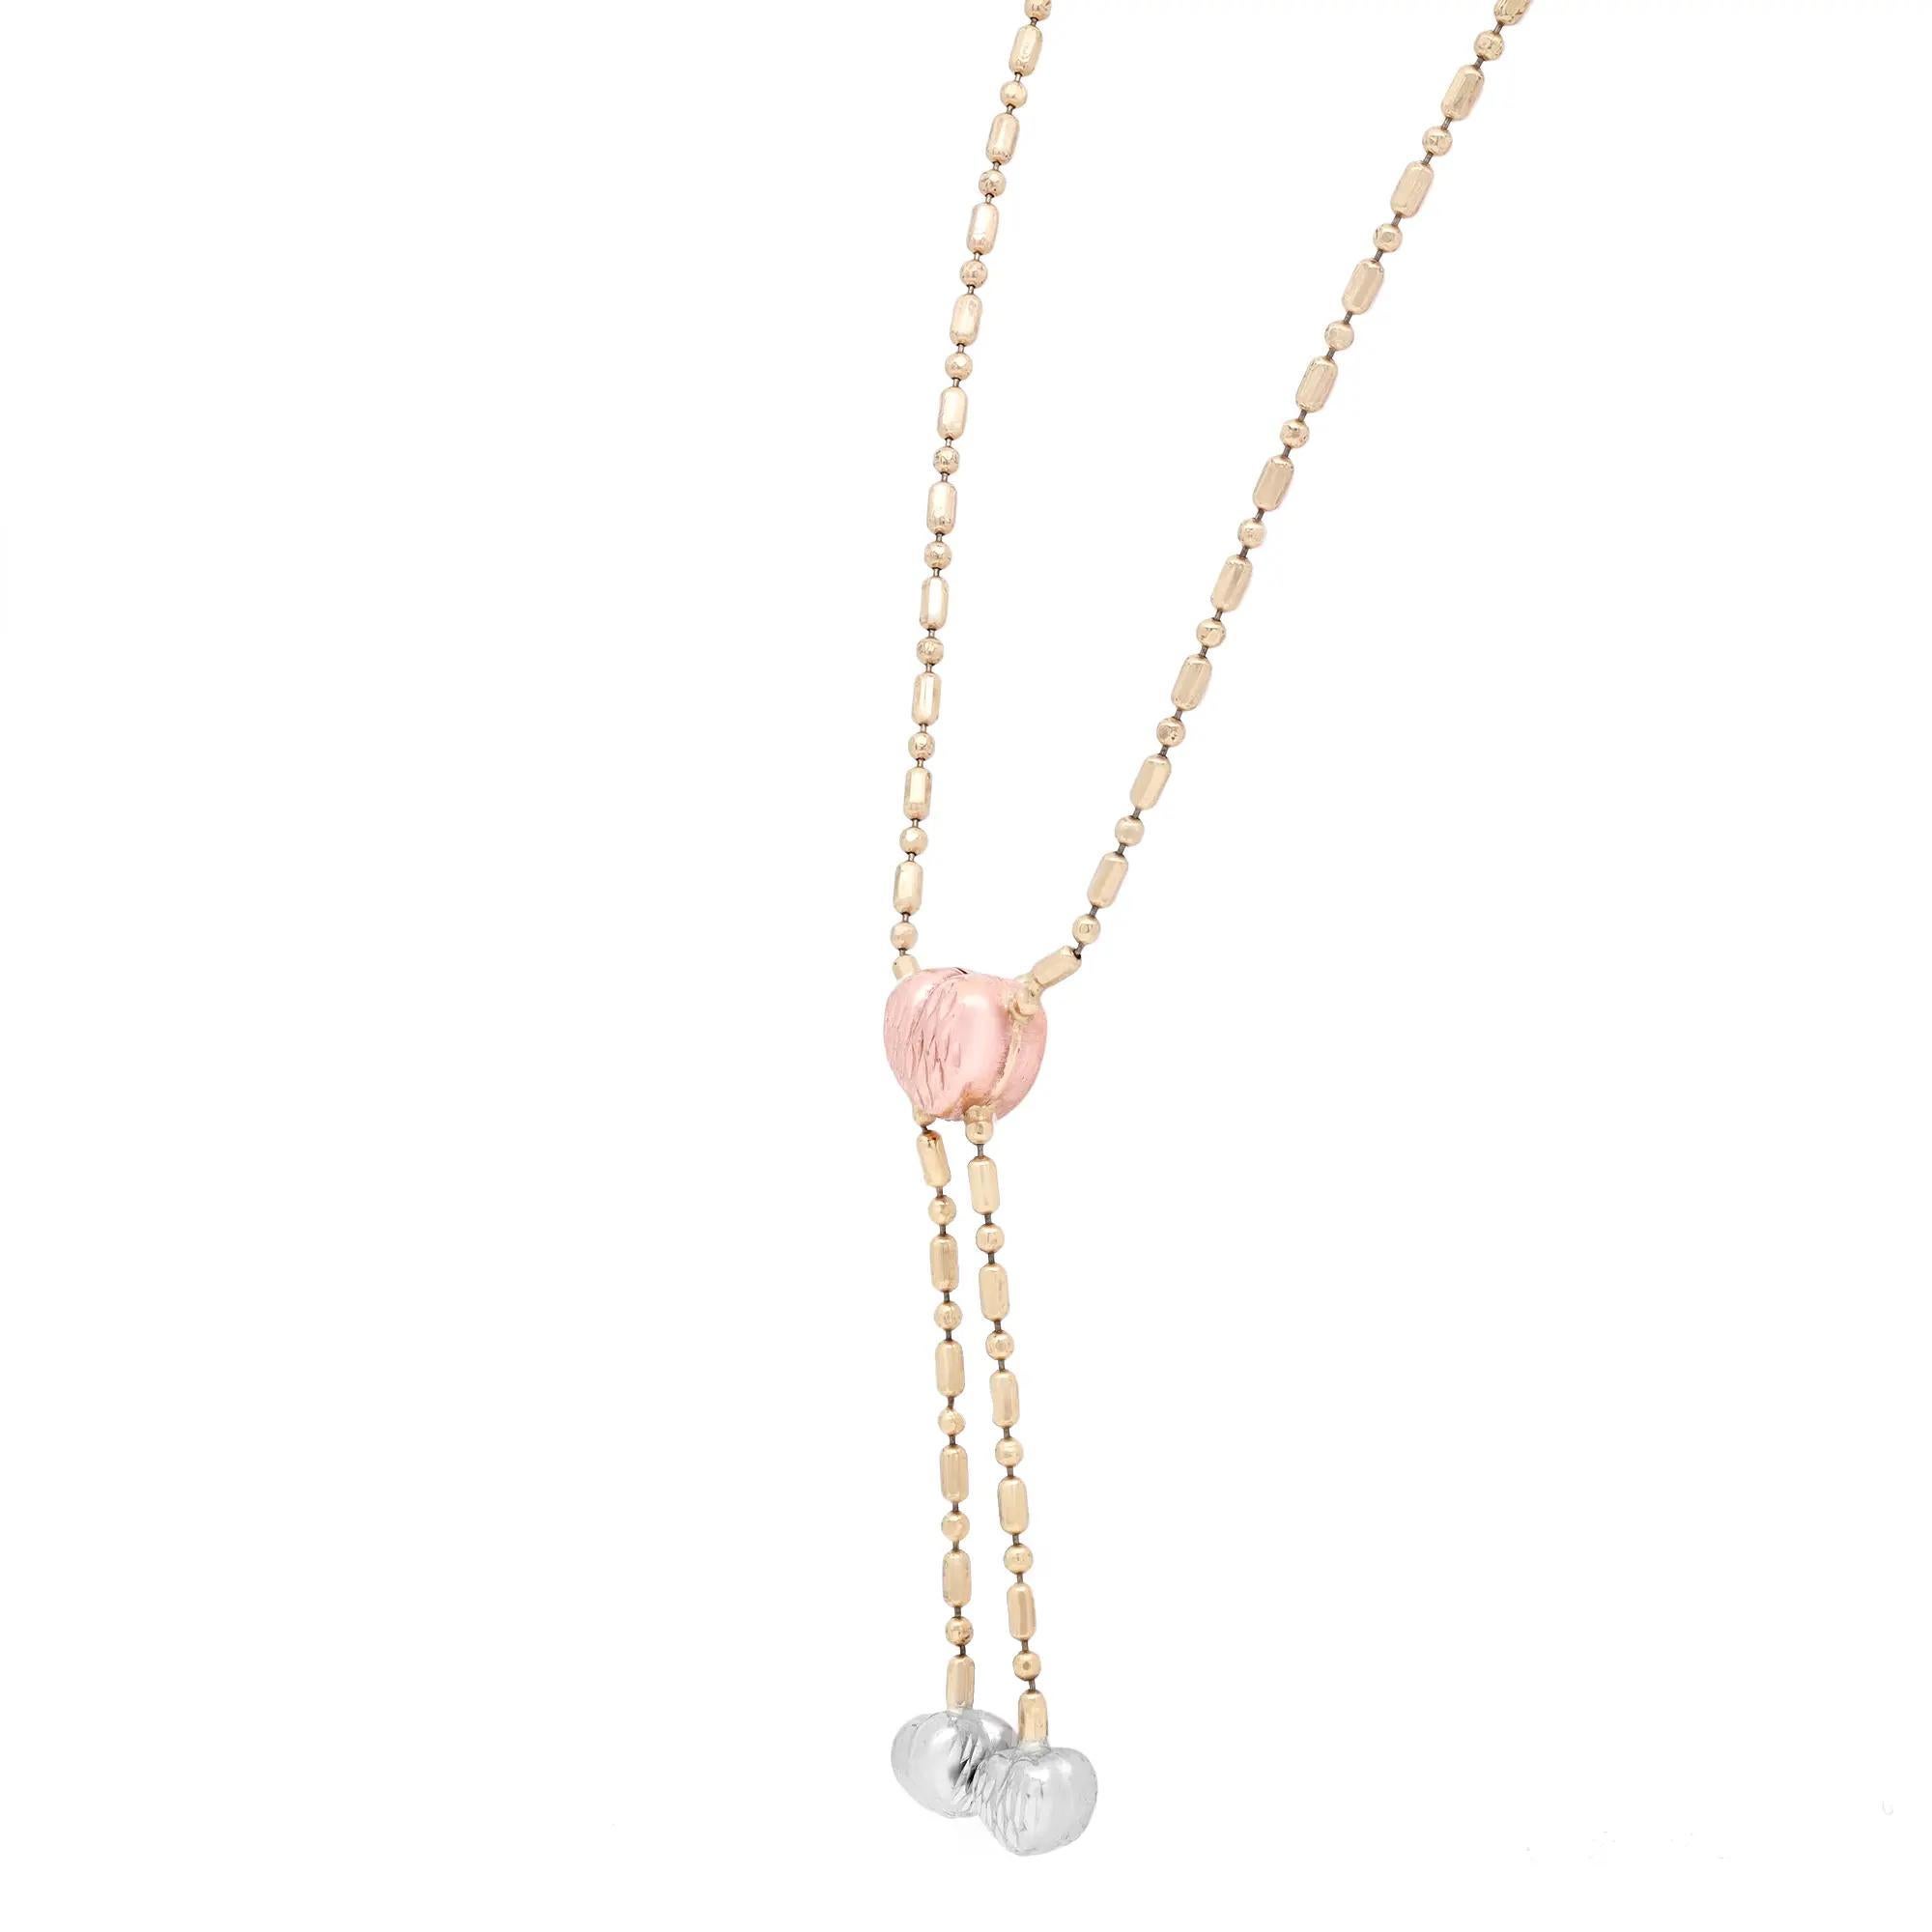 This classic lariat multicolor gold chain is handcrafted in highly gleaming 14K yellow, rose, and white gold. The chain features an embossed rose gold heart pendant with two hanging embossed white gold hearts. Chain length: 16 inches. Total weight: